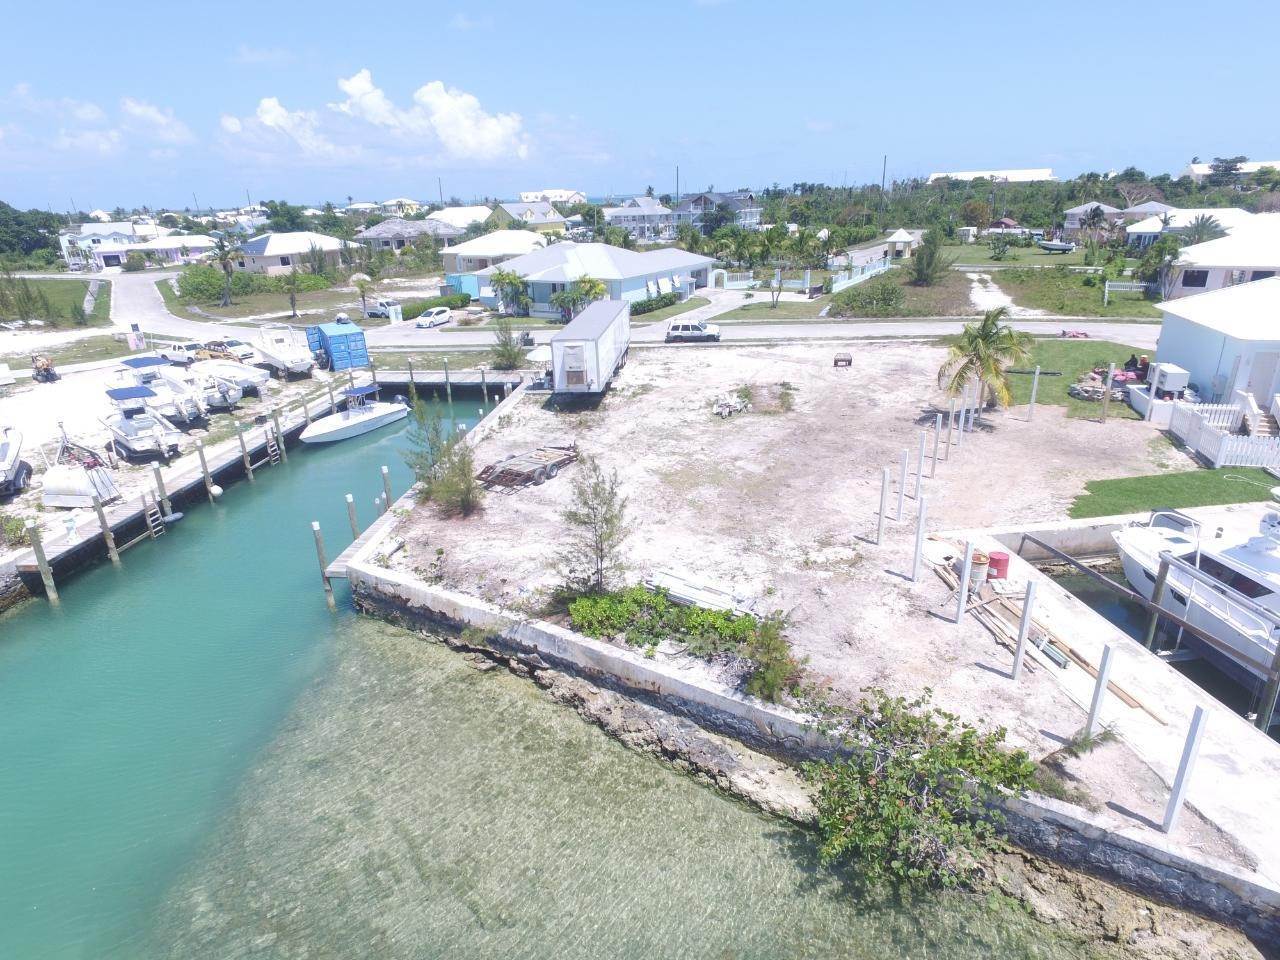 16. Lots / Acreage for Sale at Marsh Harbour, Abaco, Bahamas